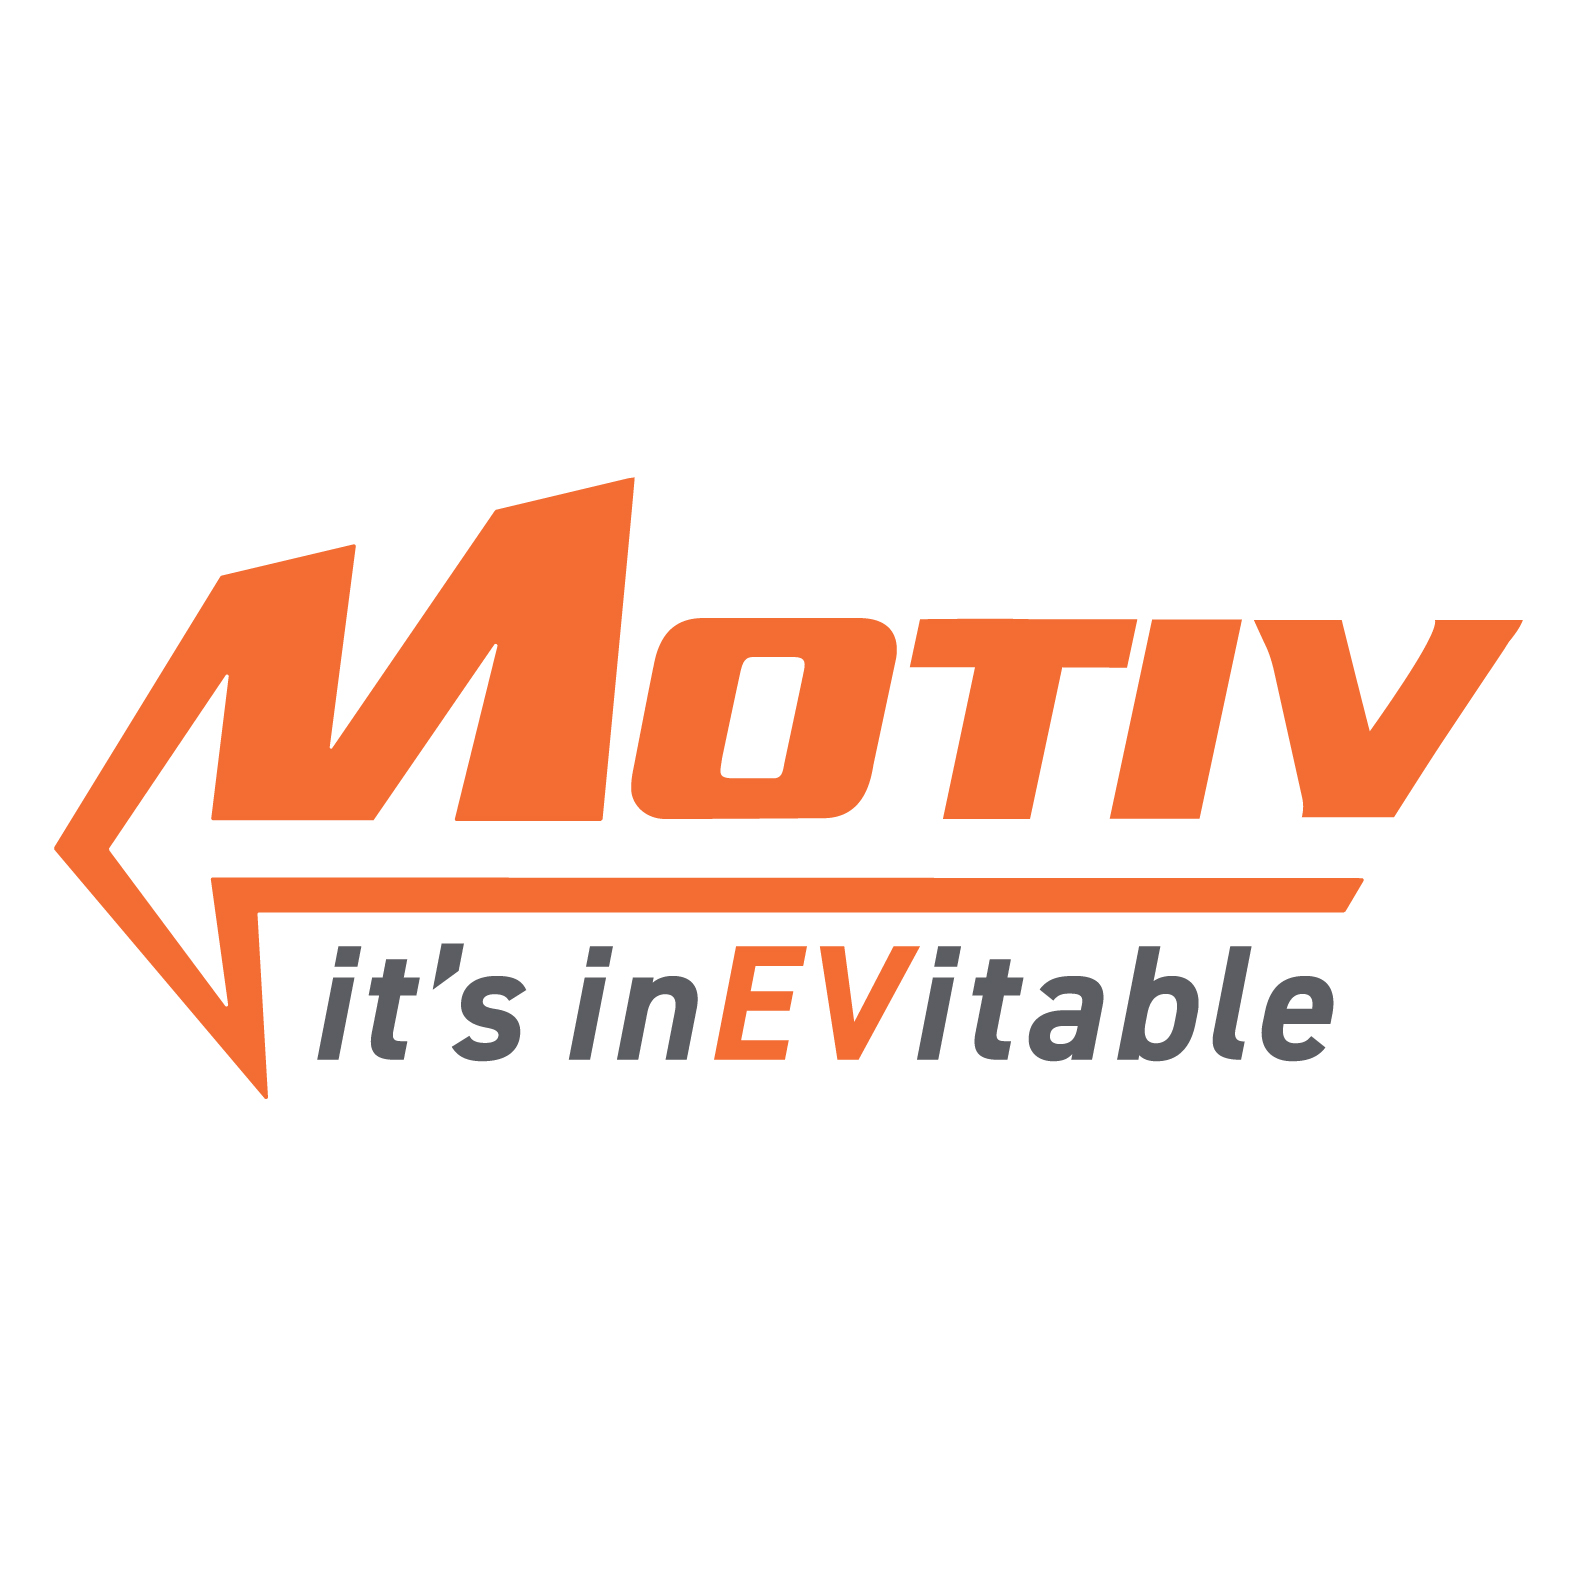 Motiv and EverCharge Team Up to Optimize Fleet Charging